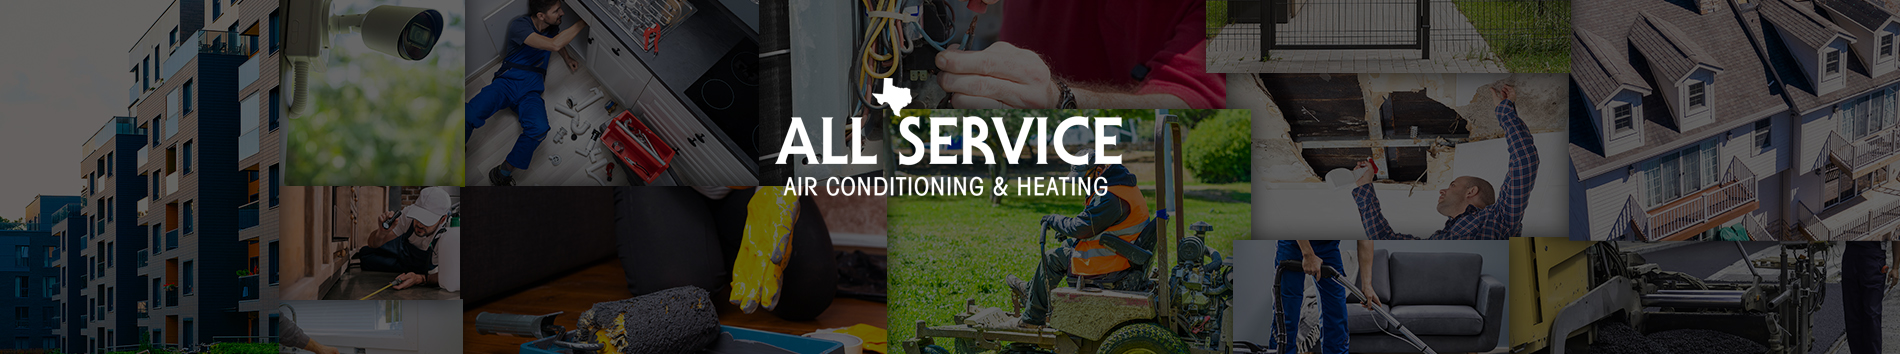 All Service Air Conditioning & Heating